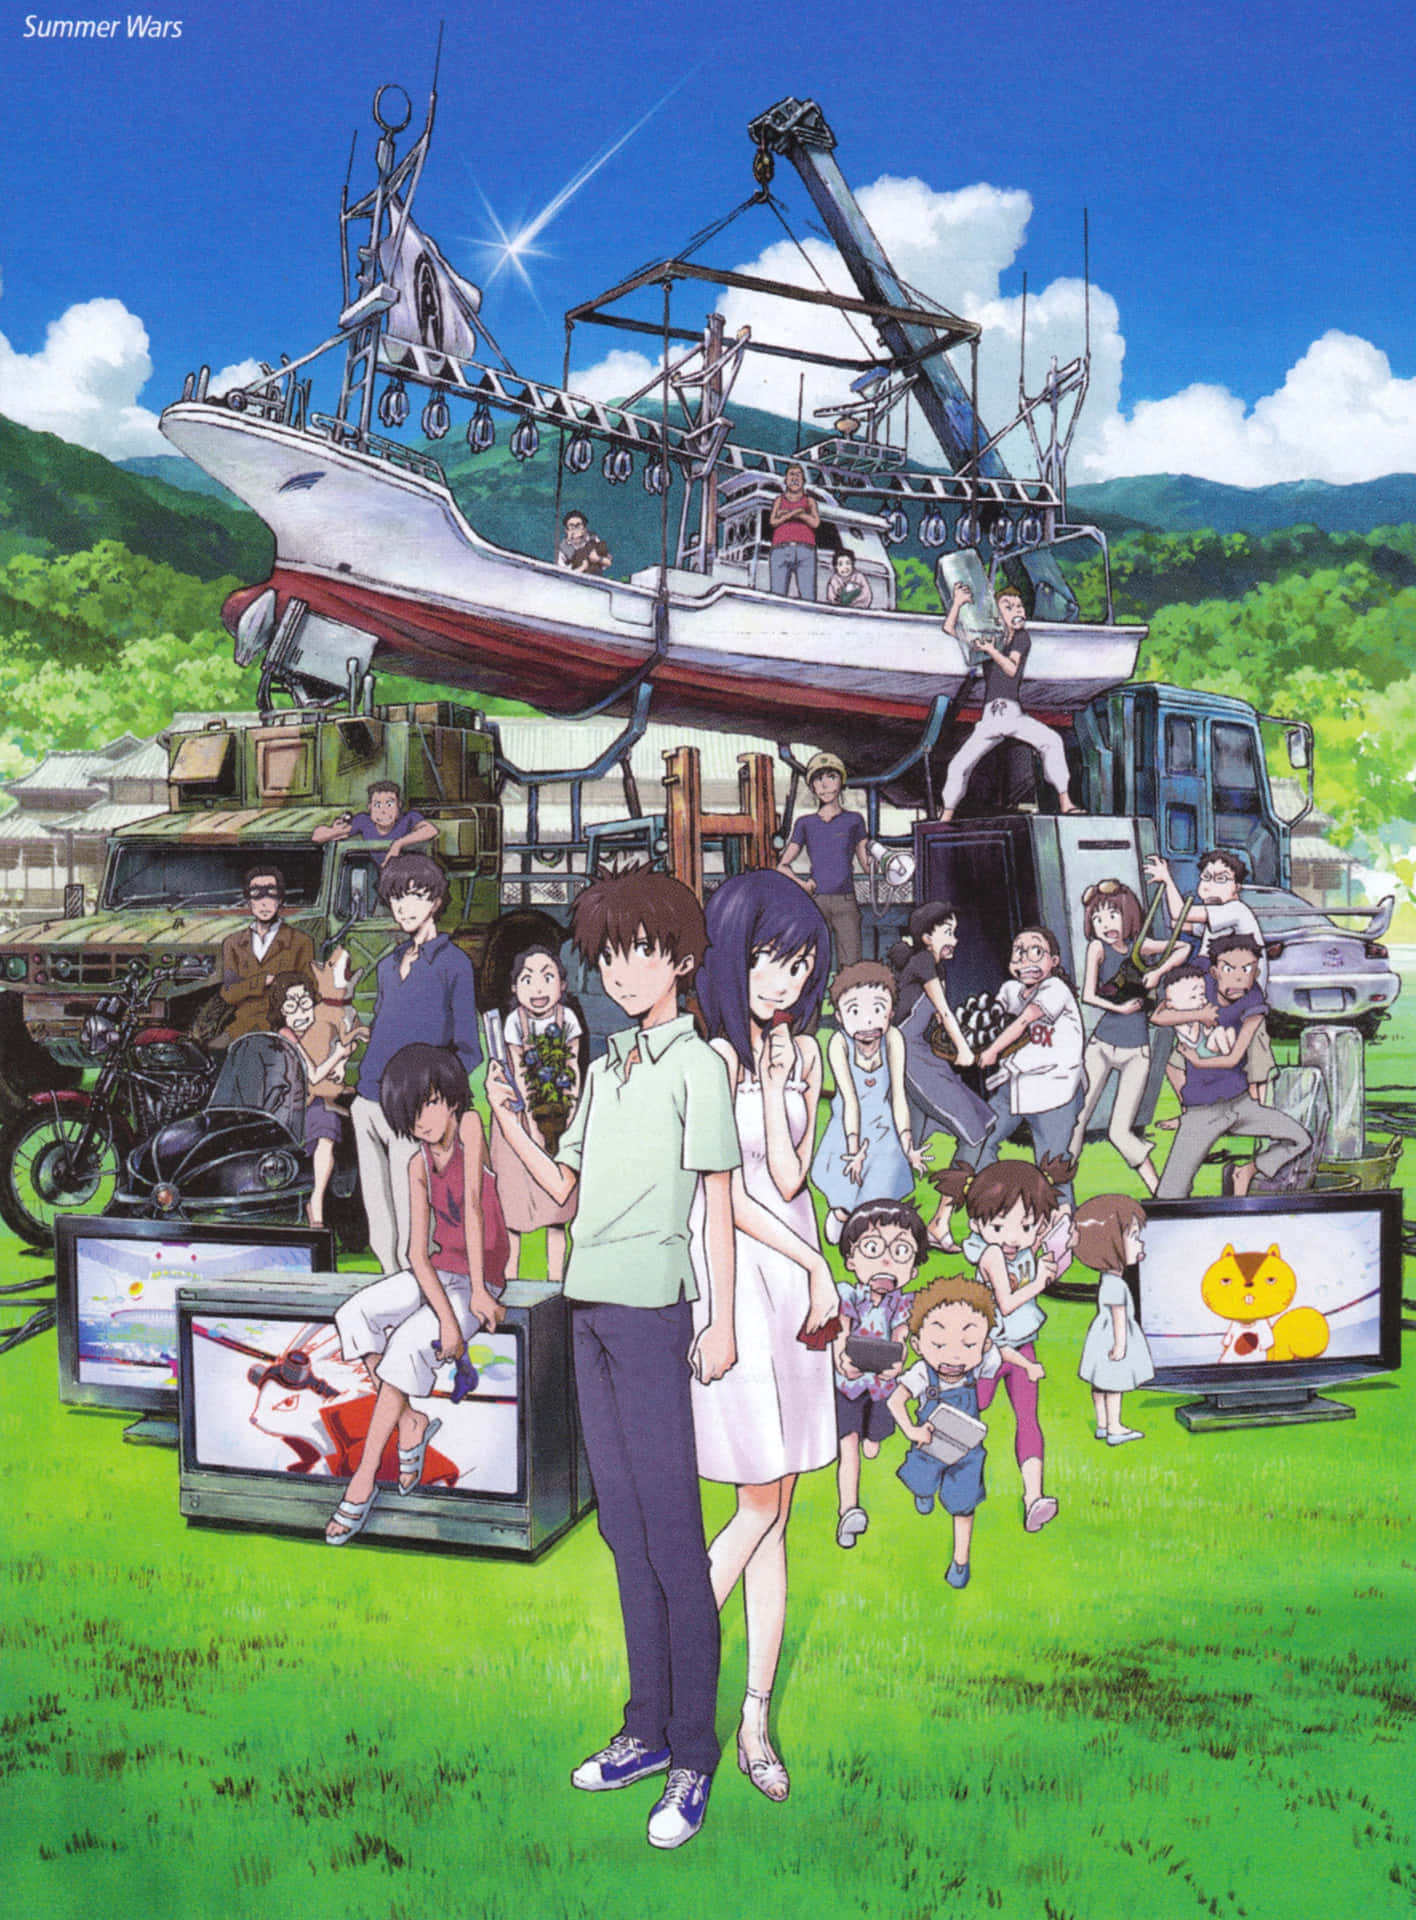 Enjoy majestic views of summer with the story of Summer Wars Wallpaper